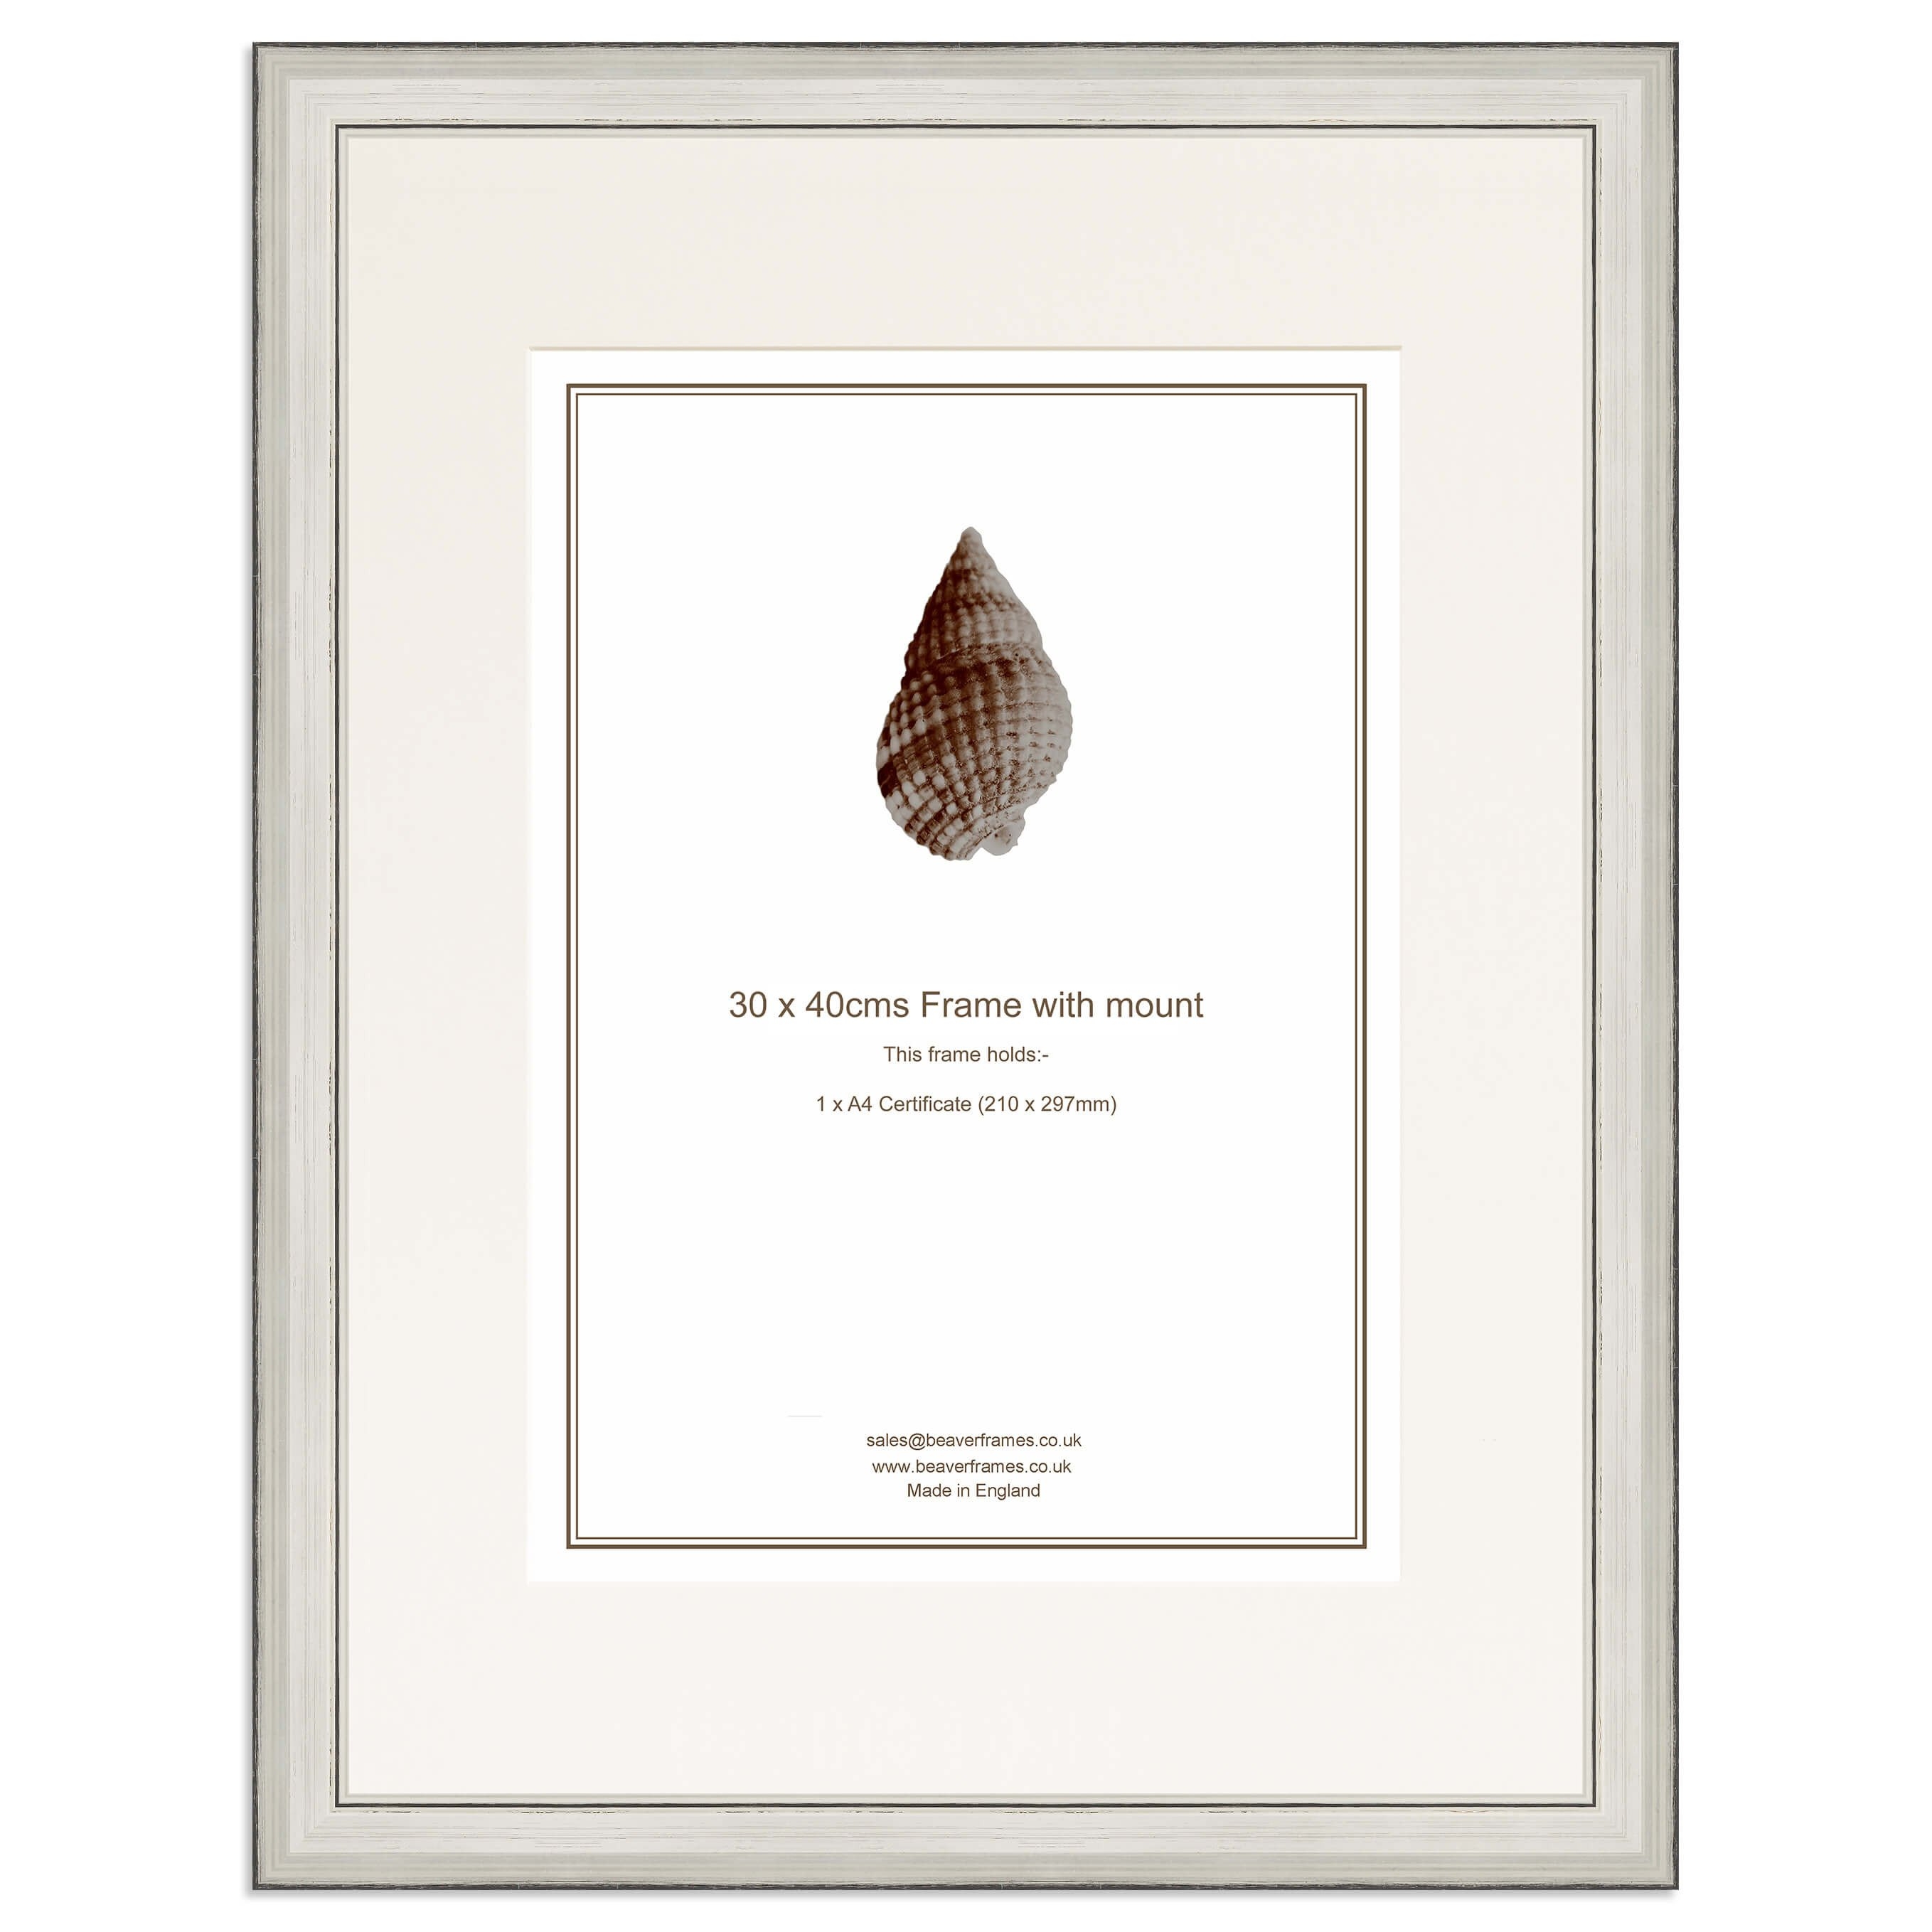 Elite Collection: Silver frame and mount for an A4 Certificate